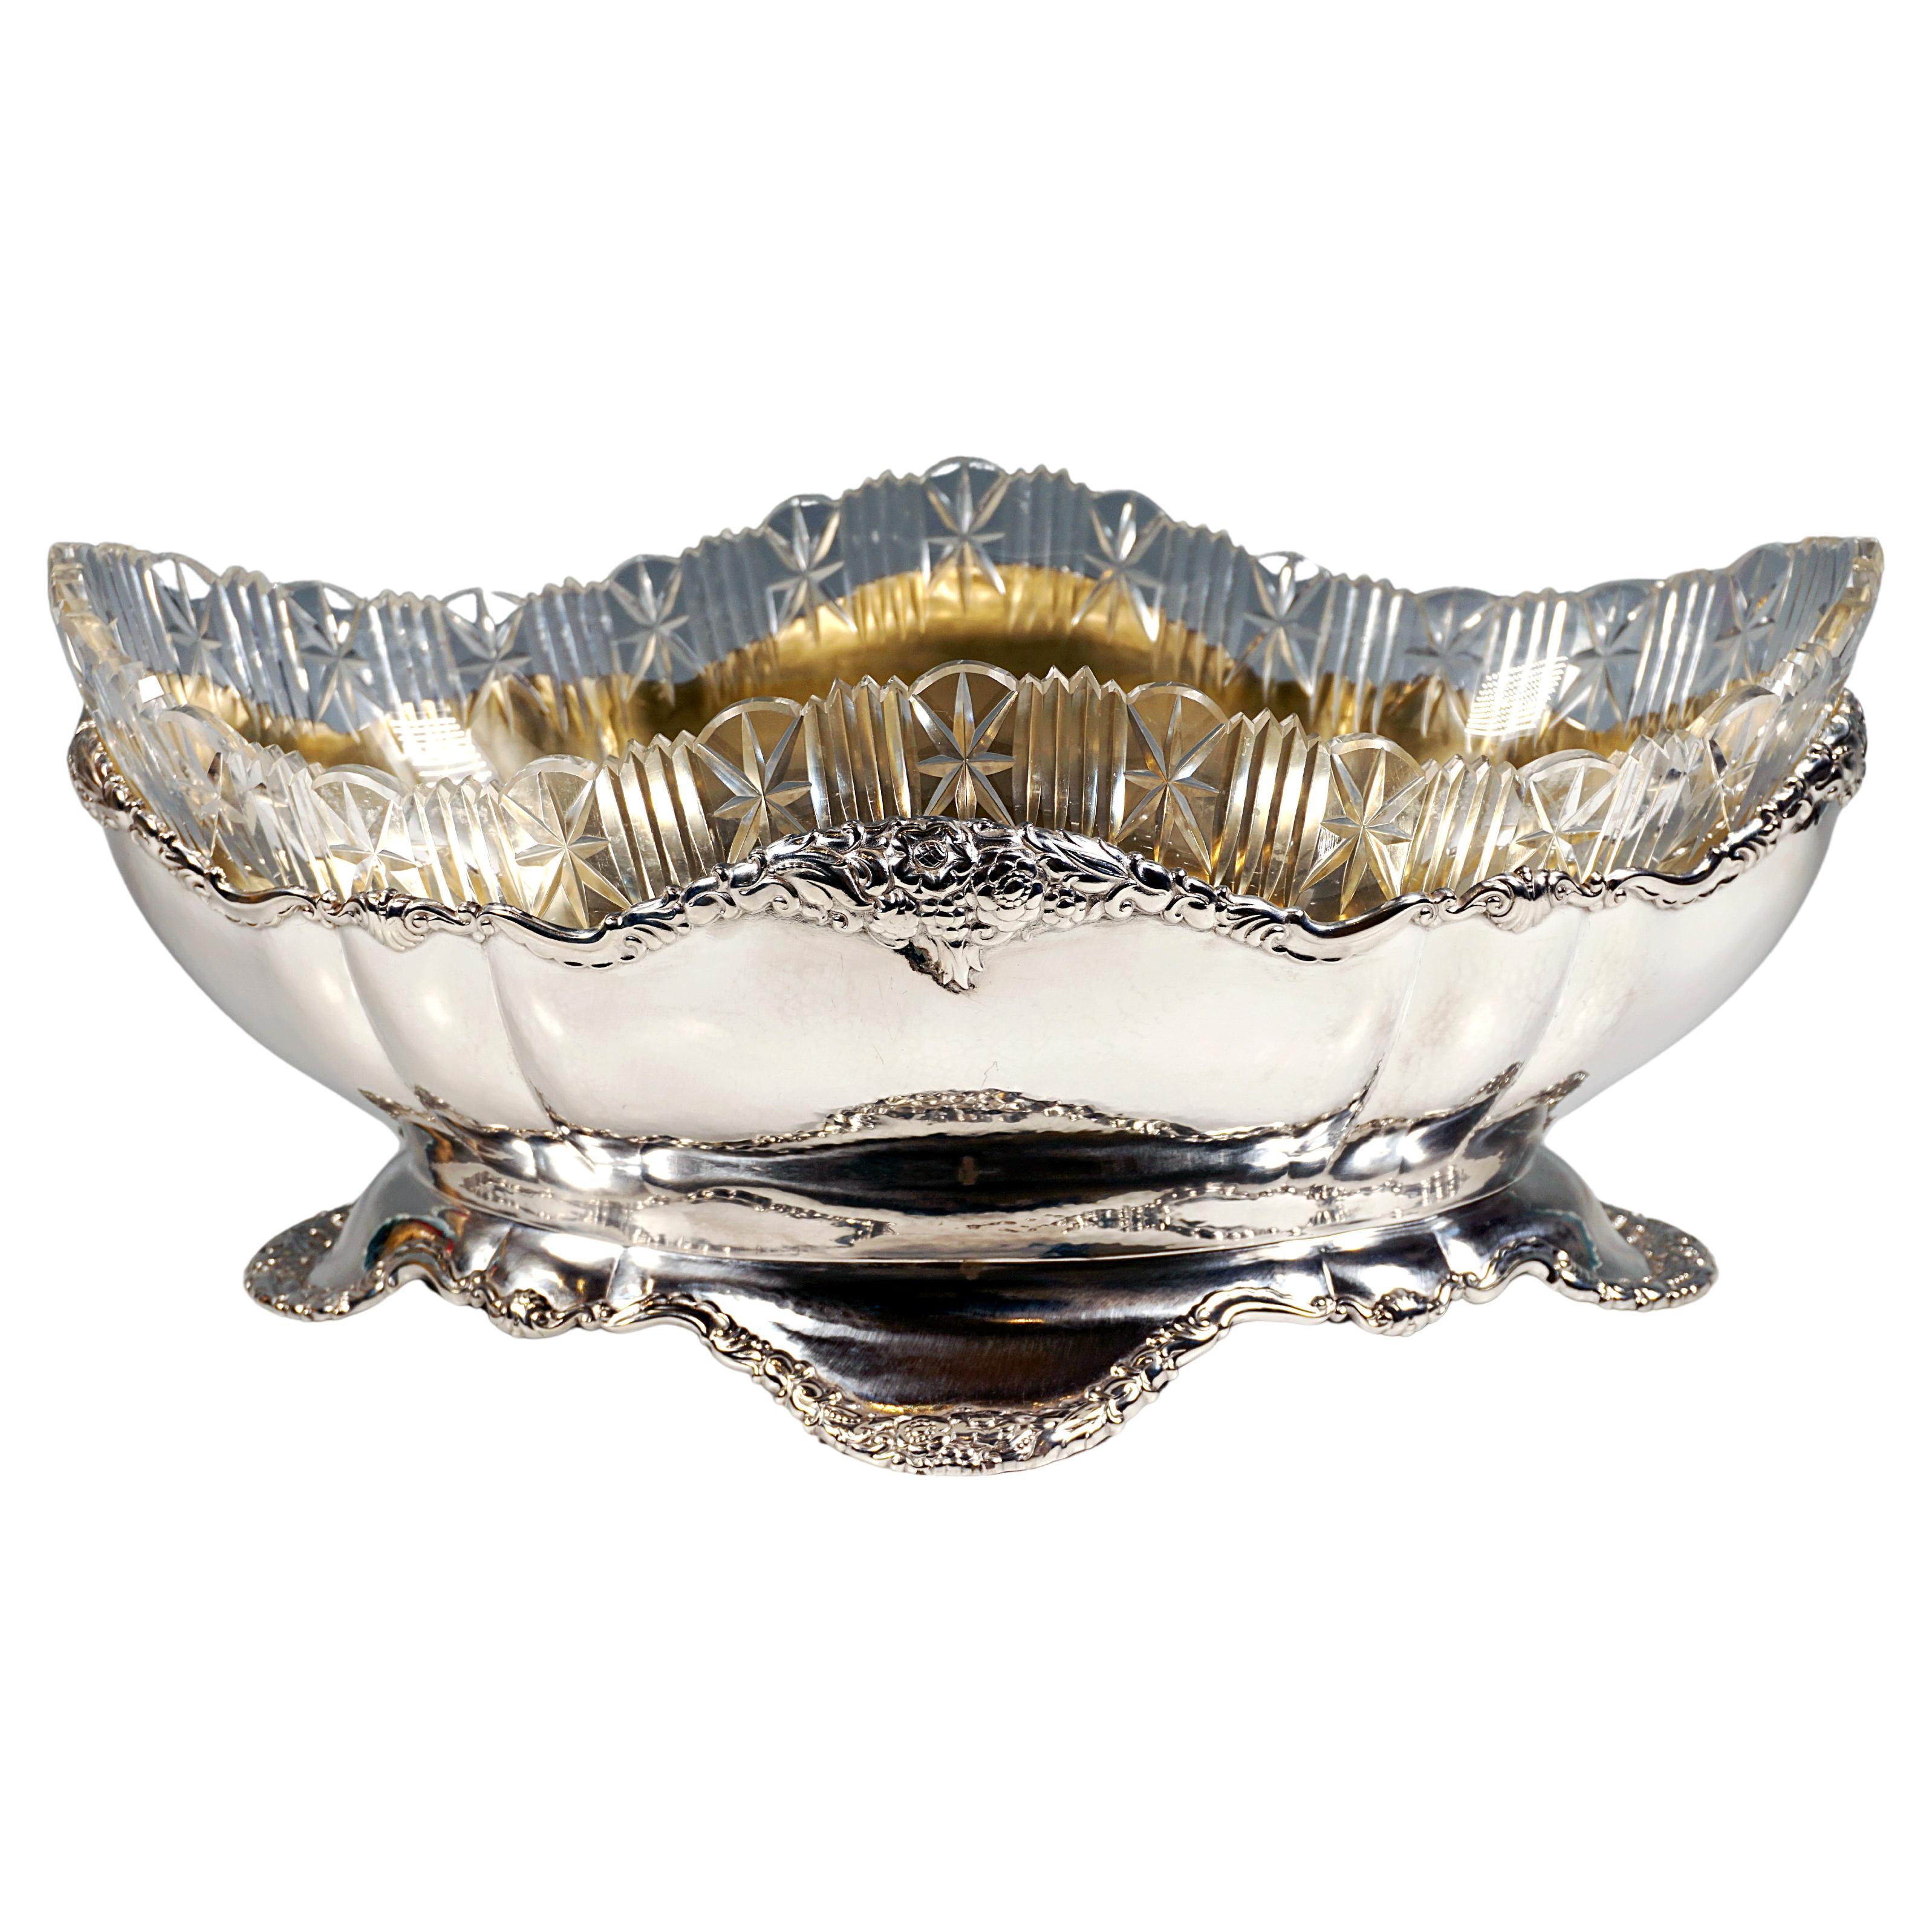 Art Nouveau Silver Jardinière With Cut Glass Liner, Theodor Müller Germany c1900 For Sale